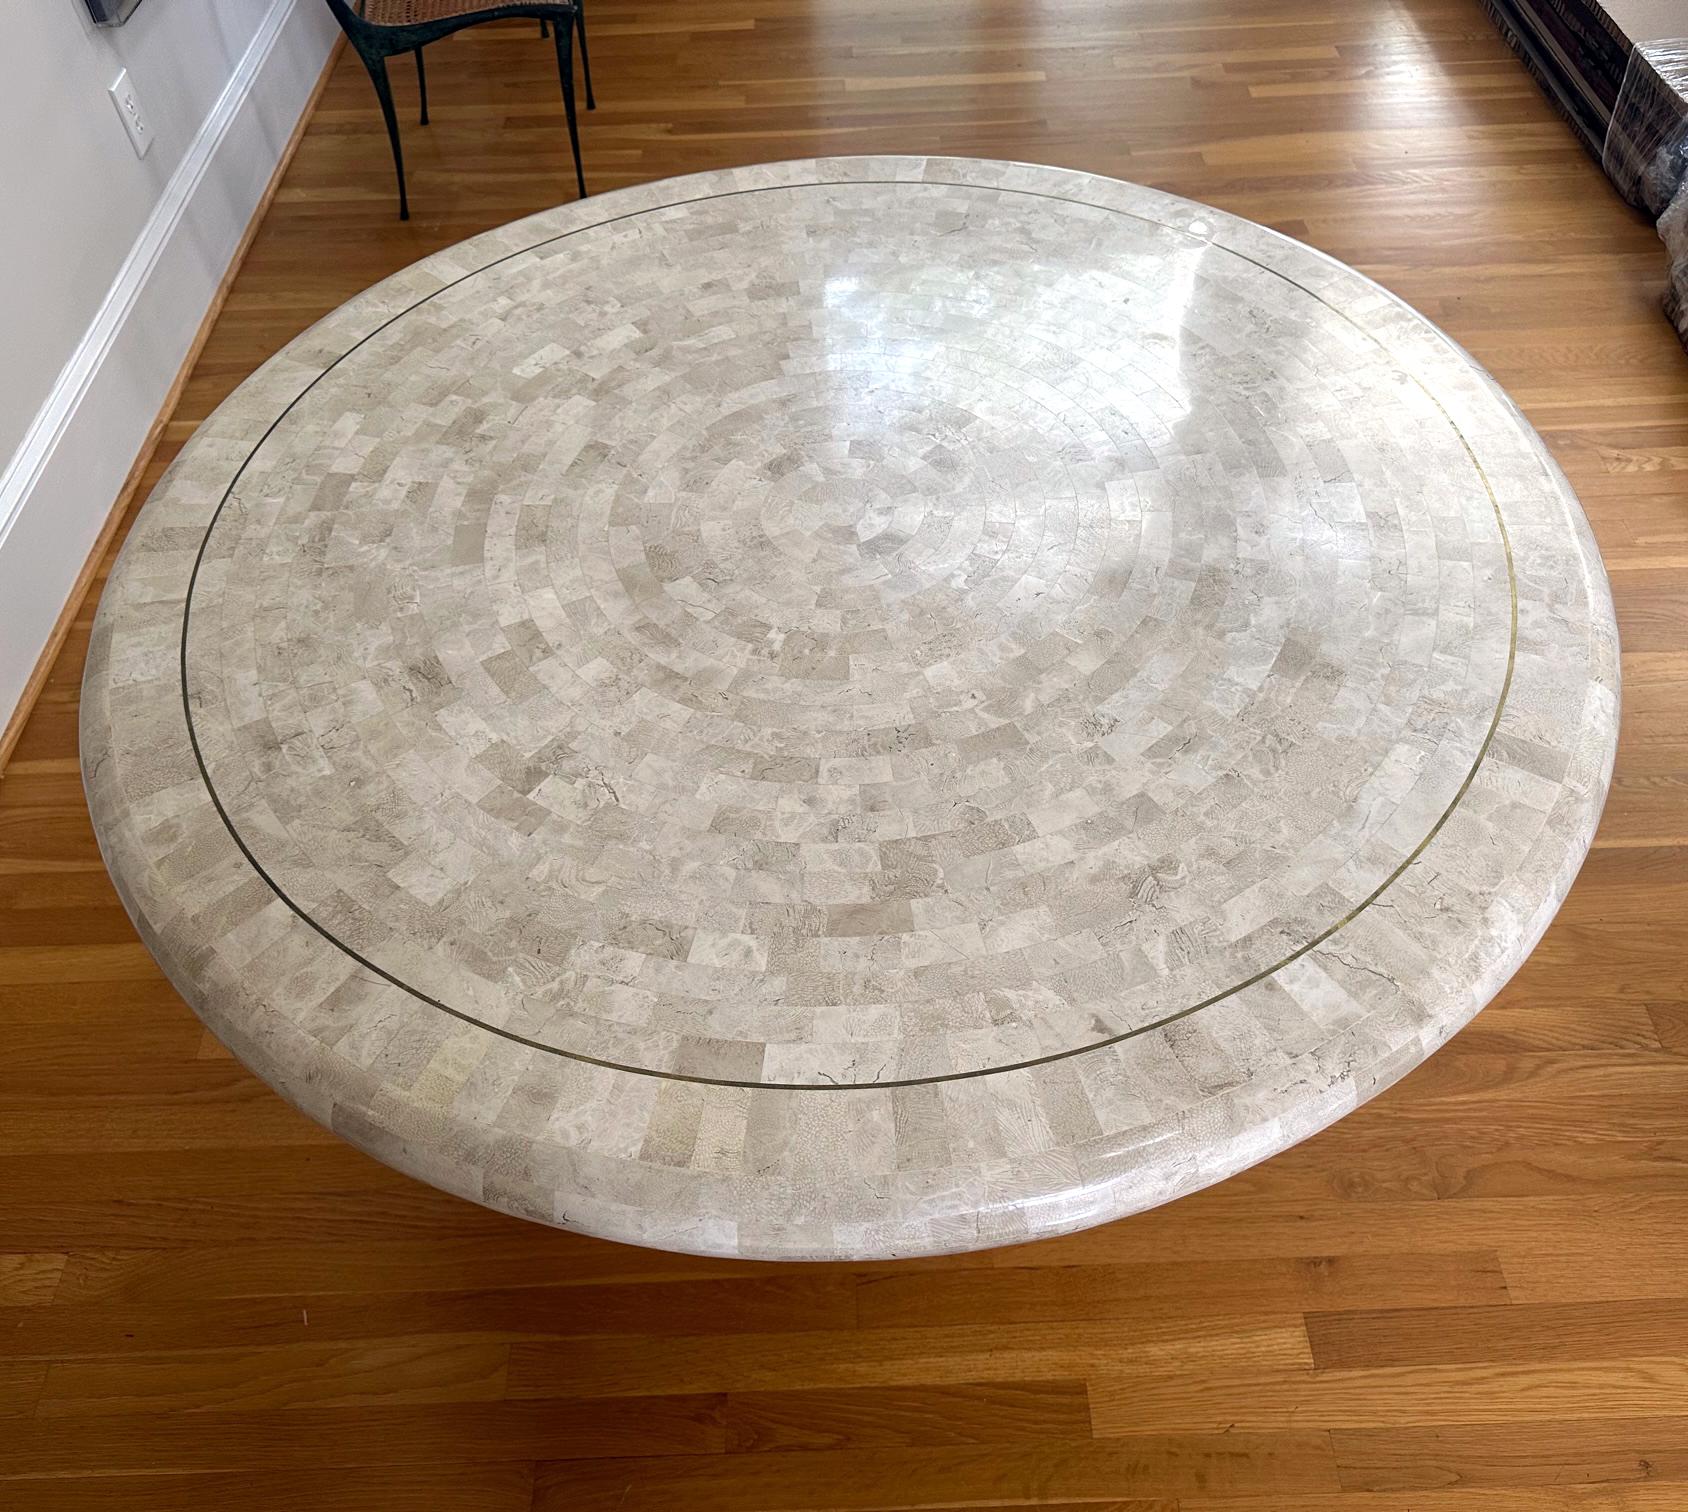 Late 20th Century Round Dining Center able with Stone Mosaic Surface by Karl Springer